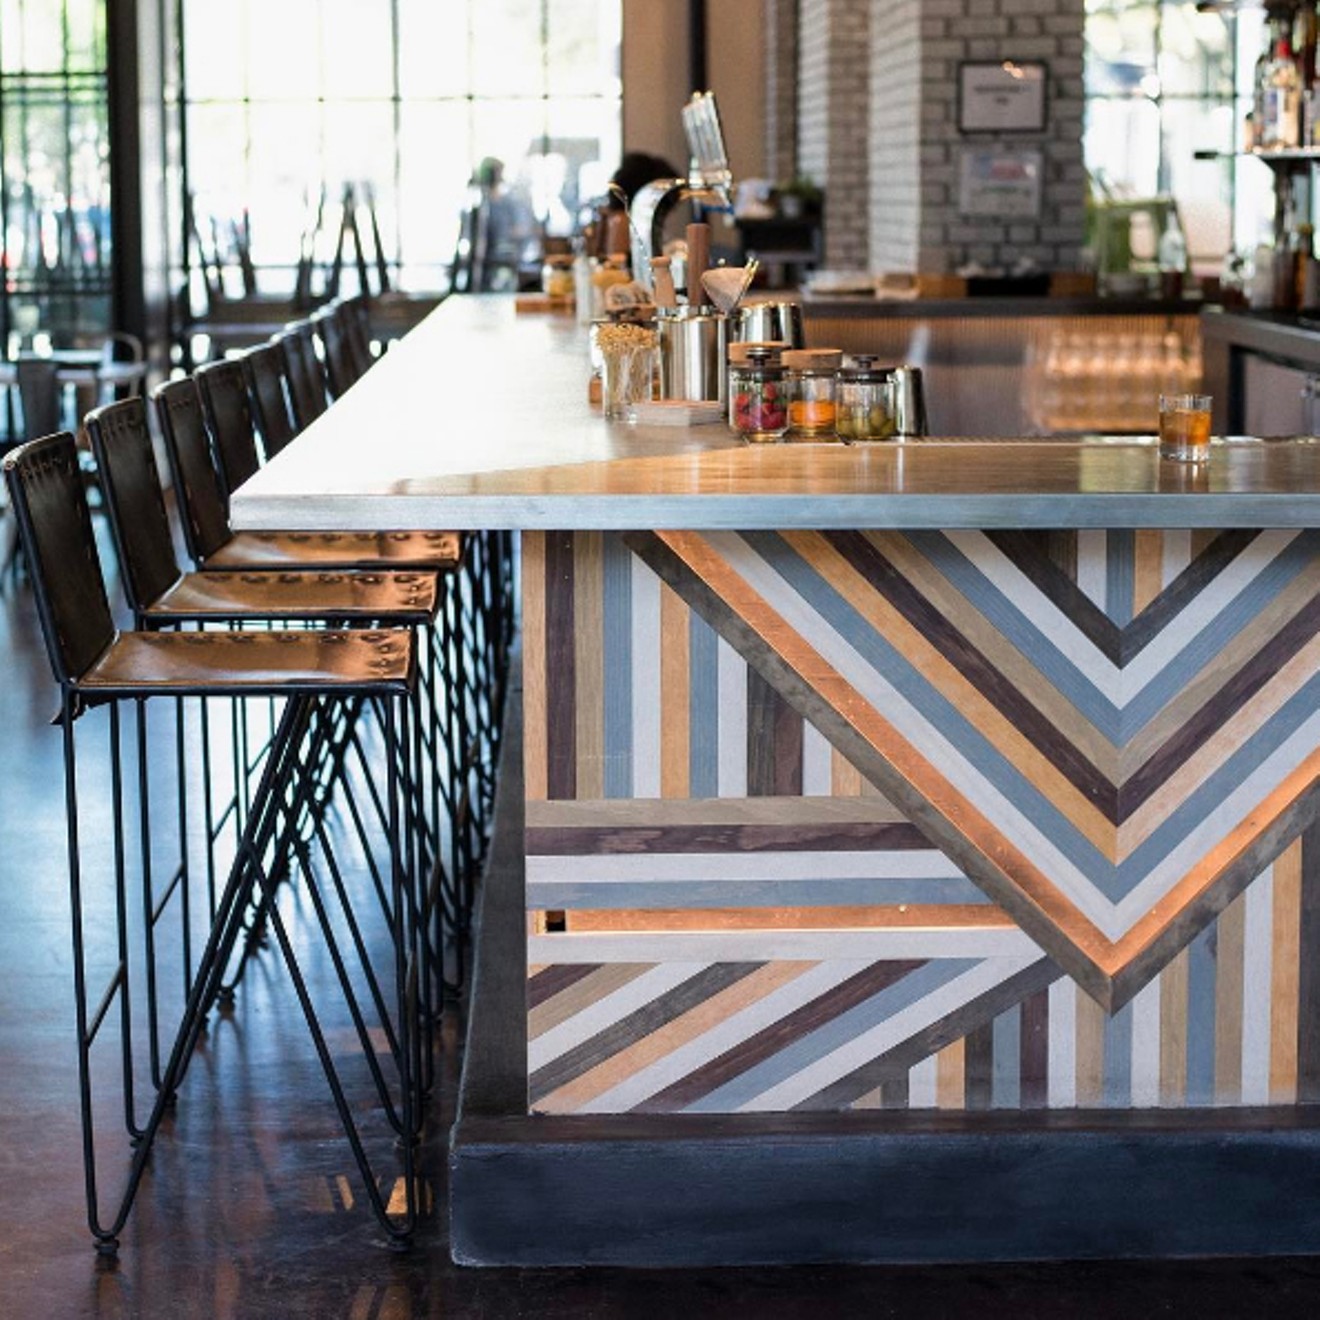 Wheelhouse's bar features "custom-designed, Scandinavian-inspired wood inlay and Garza Marfa leather barstools. (We are in the Design District, after all)," according to the restaurant's Instagram.